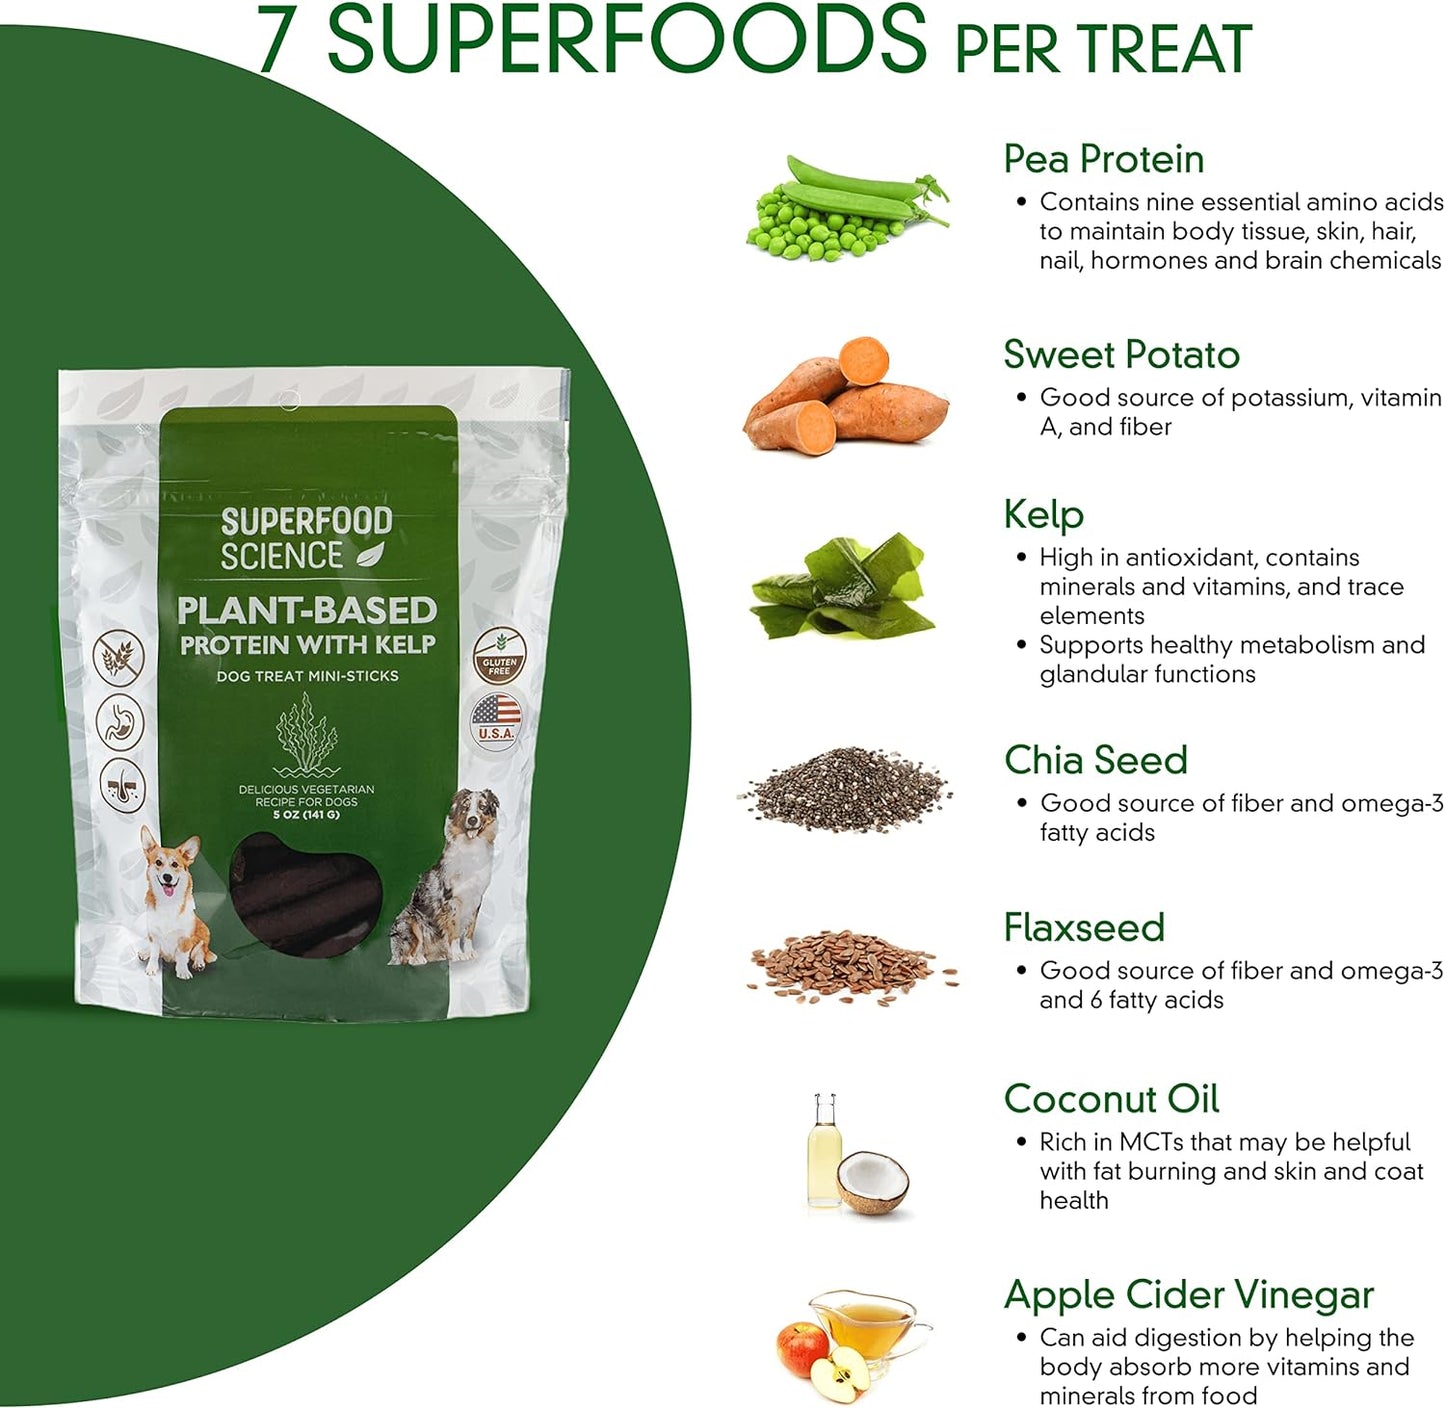 Superfood Science Vegetarian Plant-Based Protein with Kelp Dog Treats